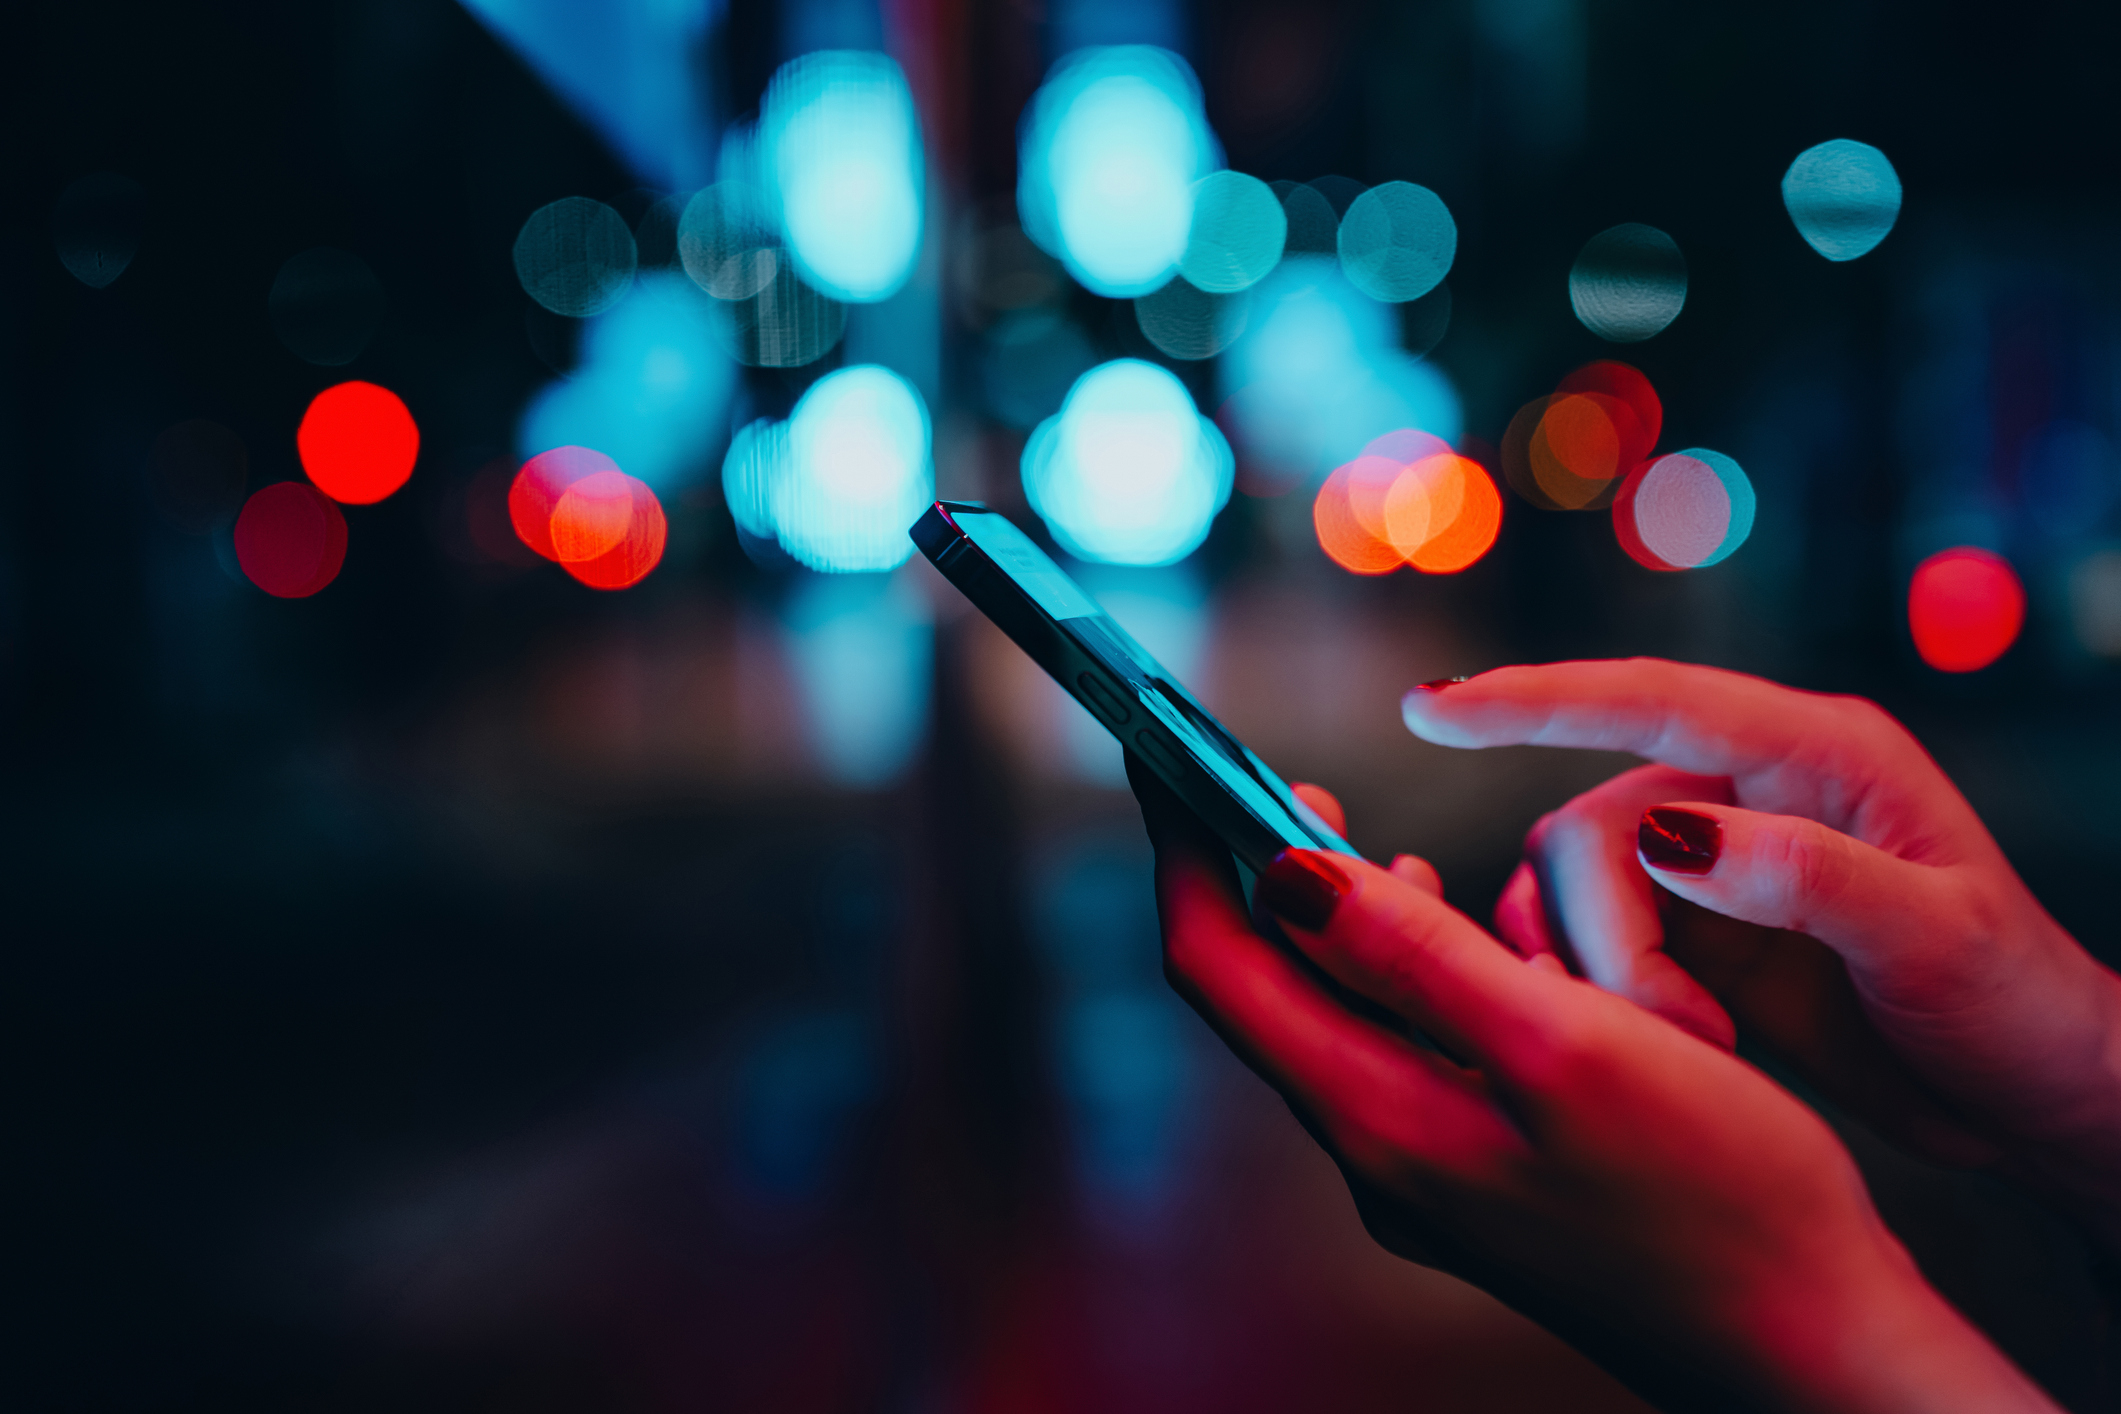 Person using a smartphone at night with blurred lights in the background